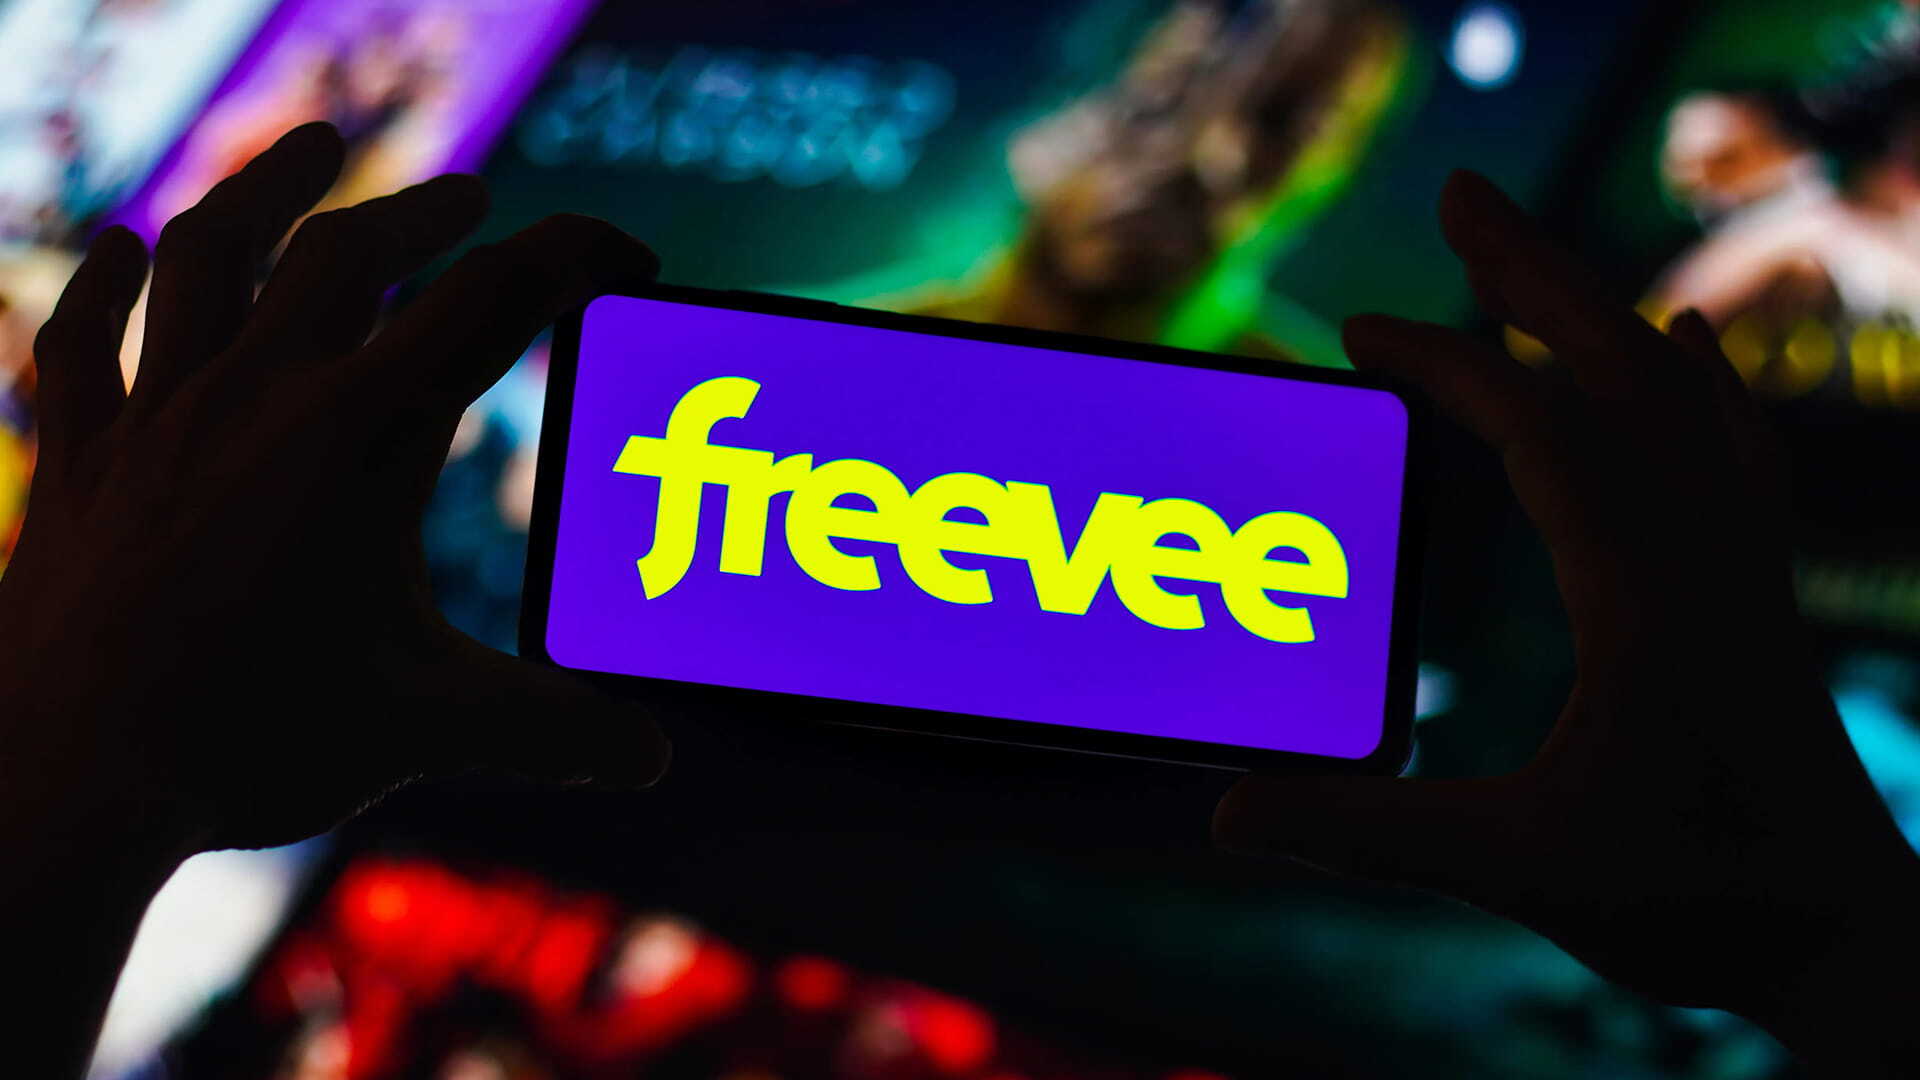 Amazon Freevee, free streaming service, ad-supported streaming service, amazon's streaming service, well-known